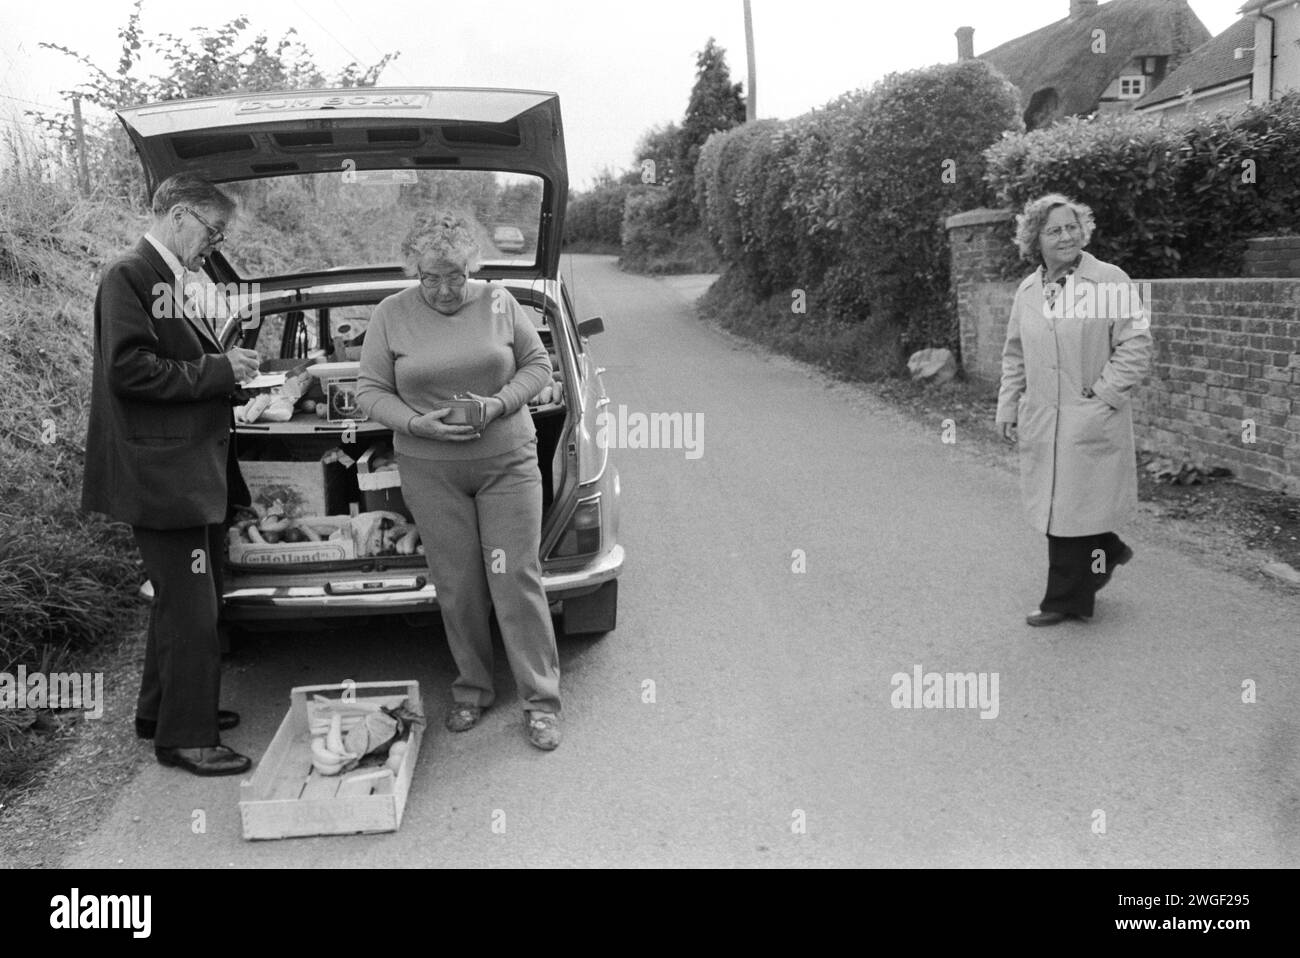 Grocery shopping mobile shop 1980s UK. The local Methodist lay preacher deliveries pre-ordered groceries once a week from the back of his car. The village shop had recently closed down.1980s Britain rural community grocery shopping Upper Basildon Berkshire England  1983  1980s  UK HOMER SYKES Stock Photo